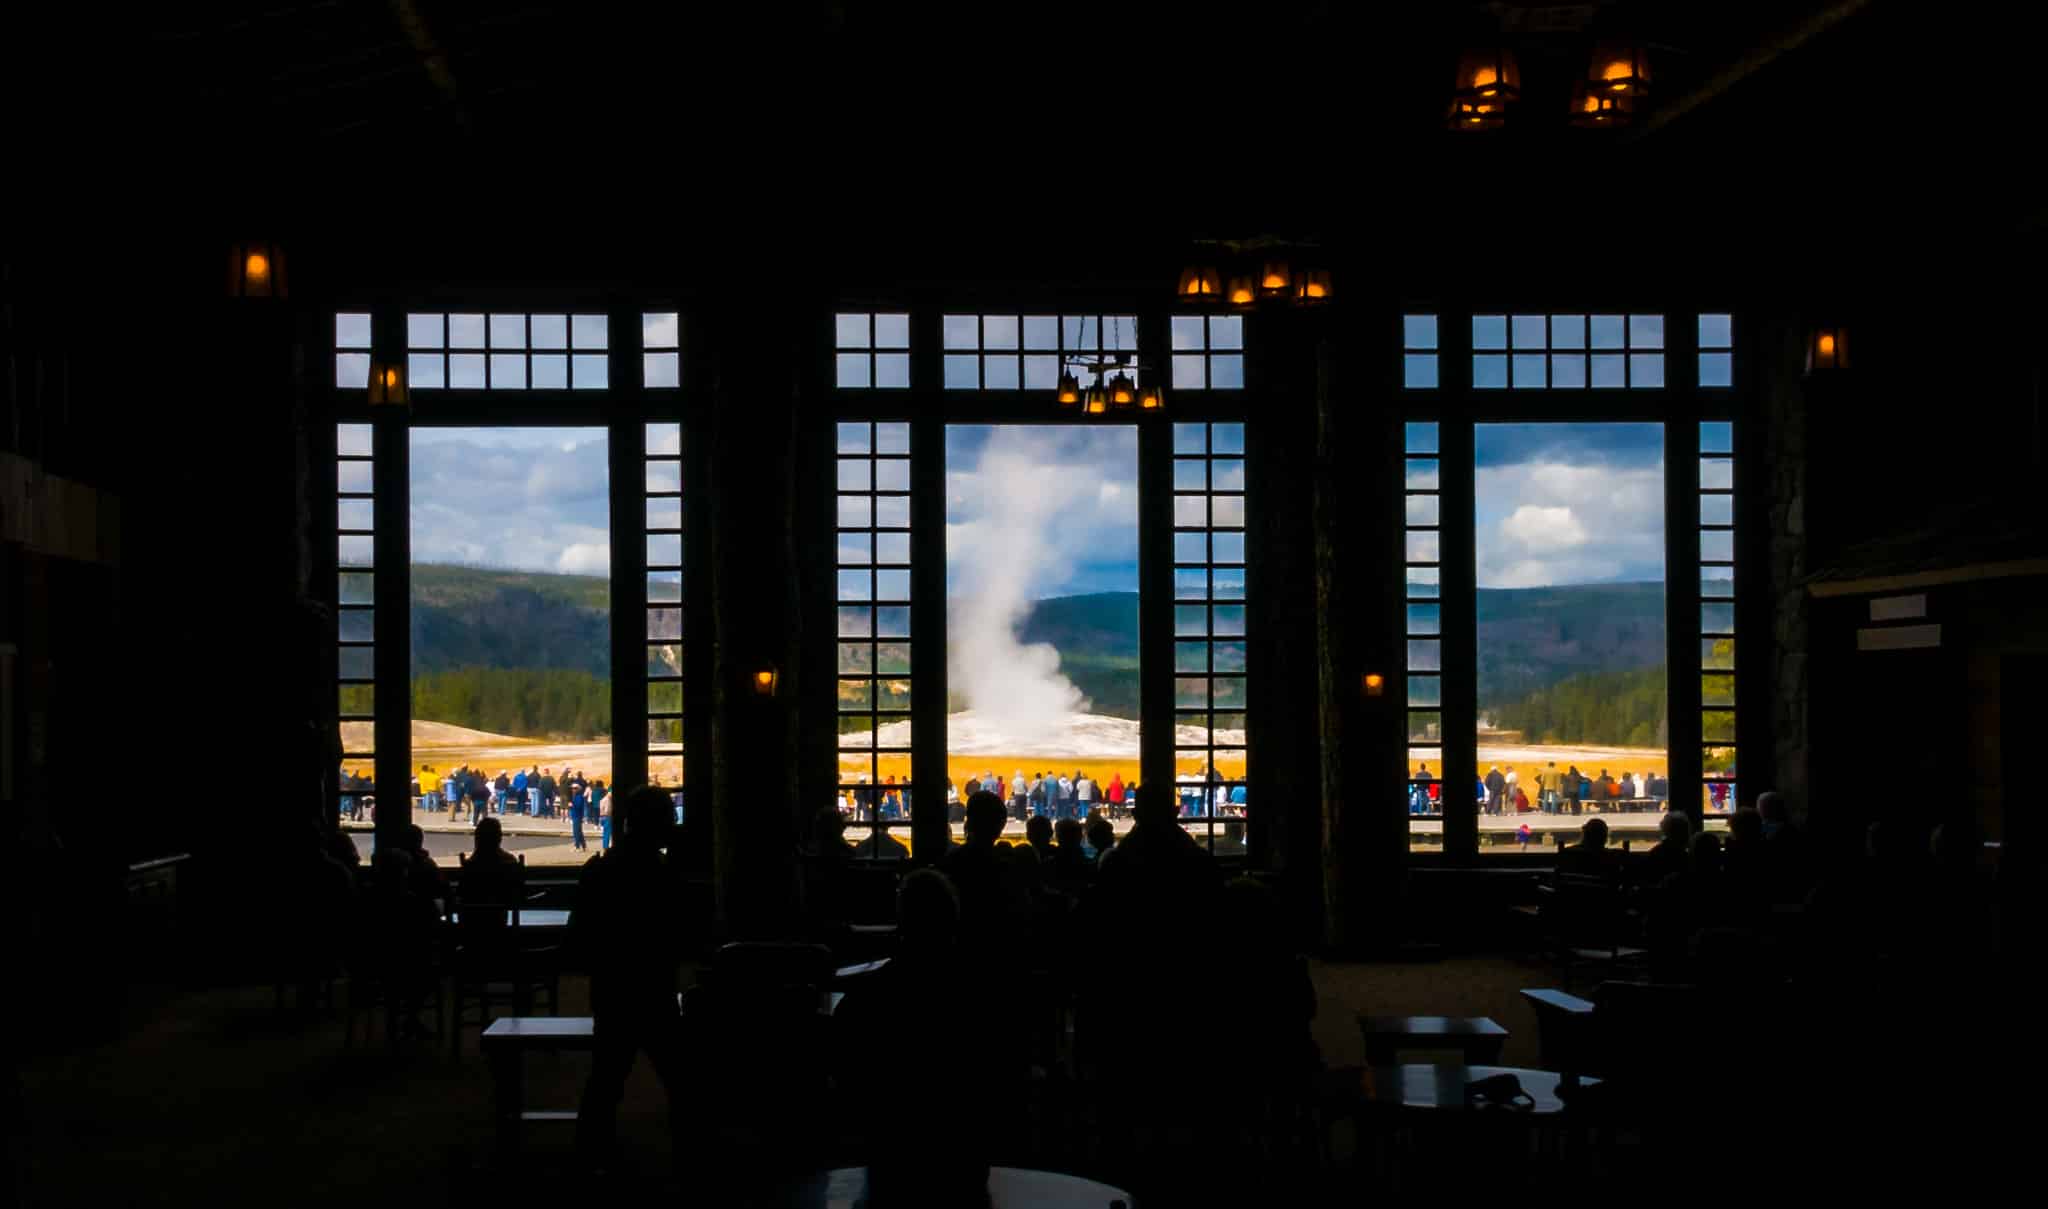 Visitors inside and outside the Old Faithful Lodge watch Old Faithful erupt.